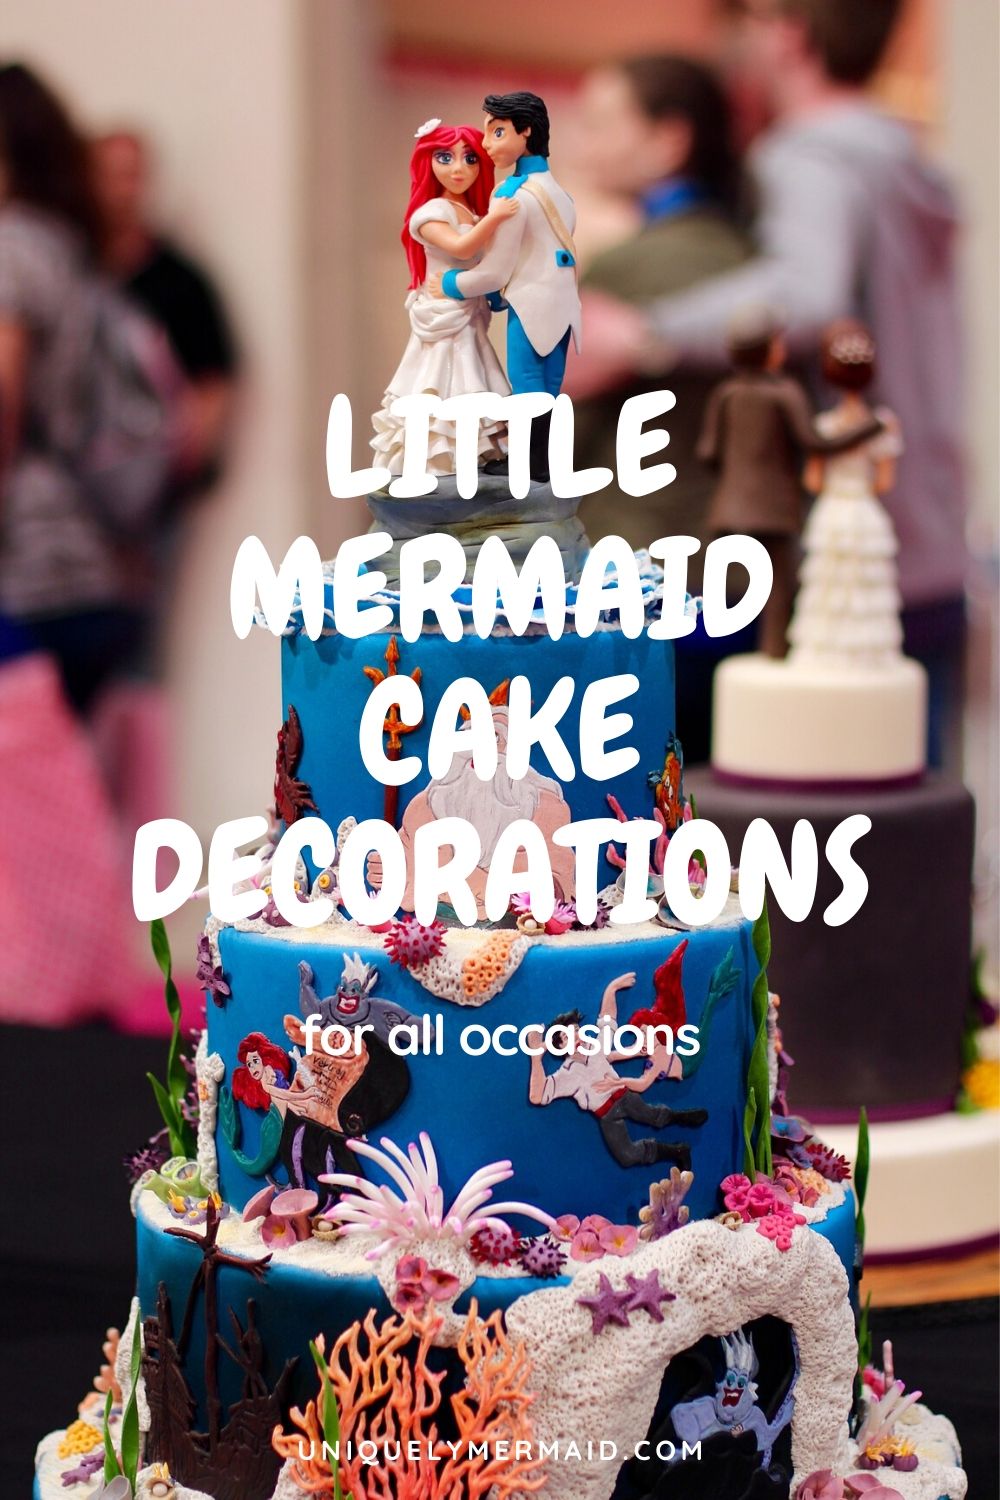 Little Mermaid cake decorations for birthdays, weddings, pool parties, and holidays featuring Ariel and the whole cast!